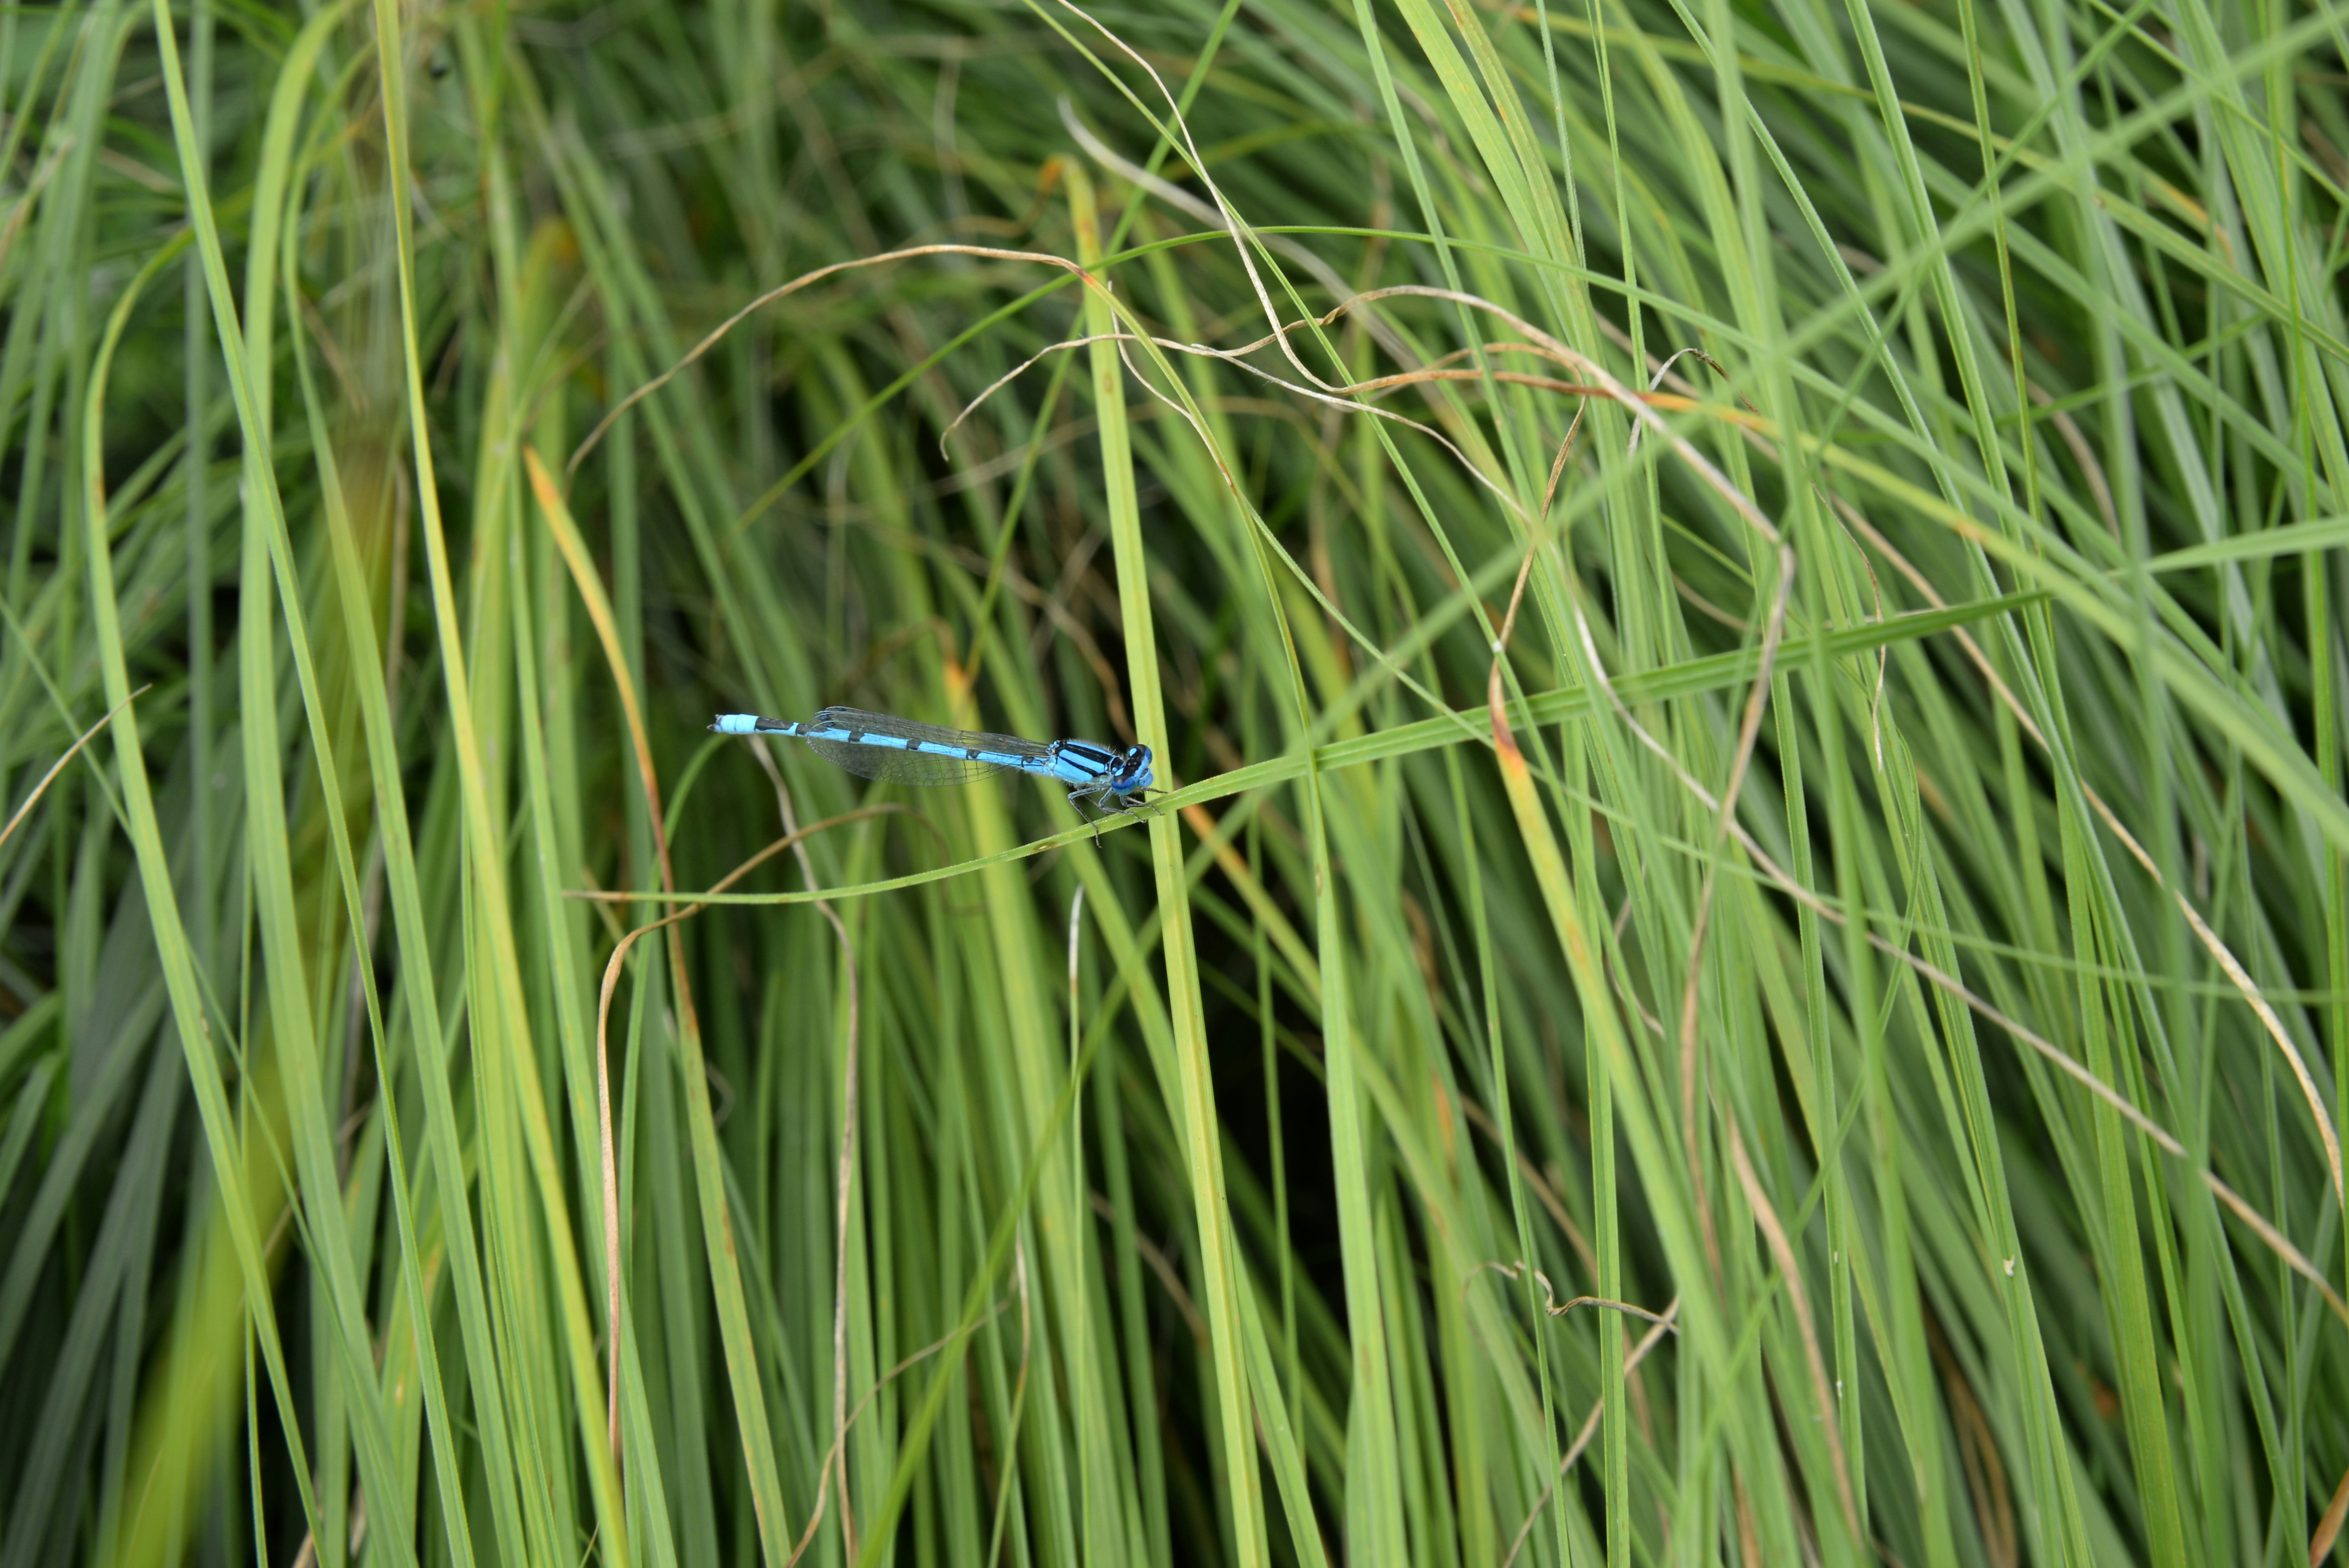 A male Familiar Bluet Damselfly (Enallagma civile), which is native to much of the United States and Canada. 